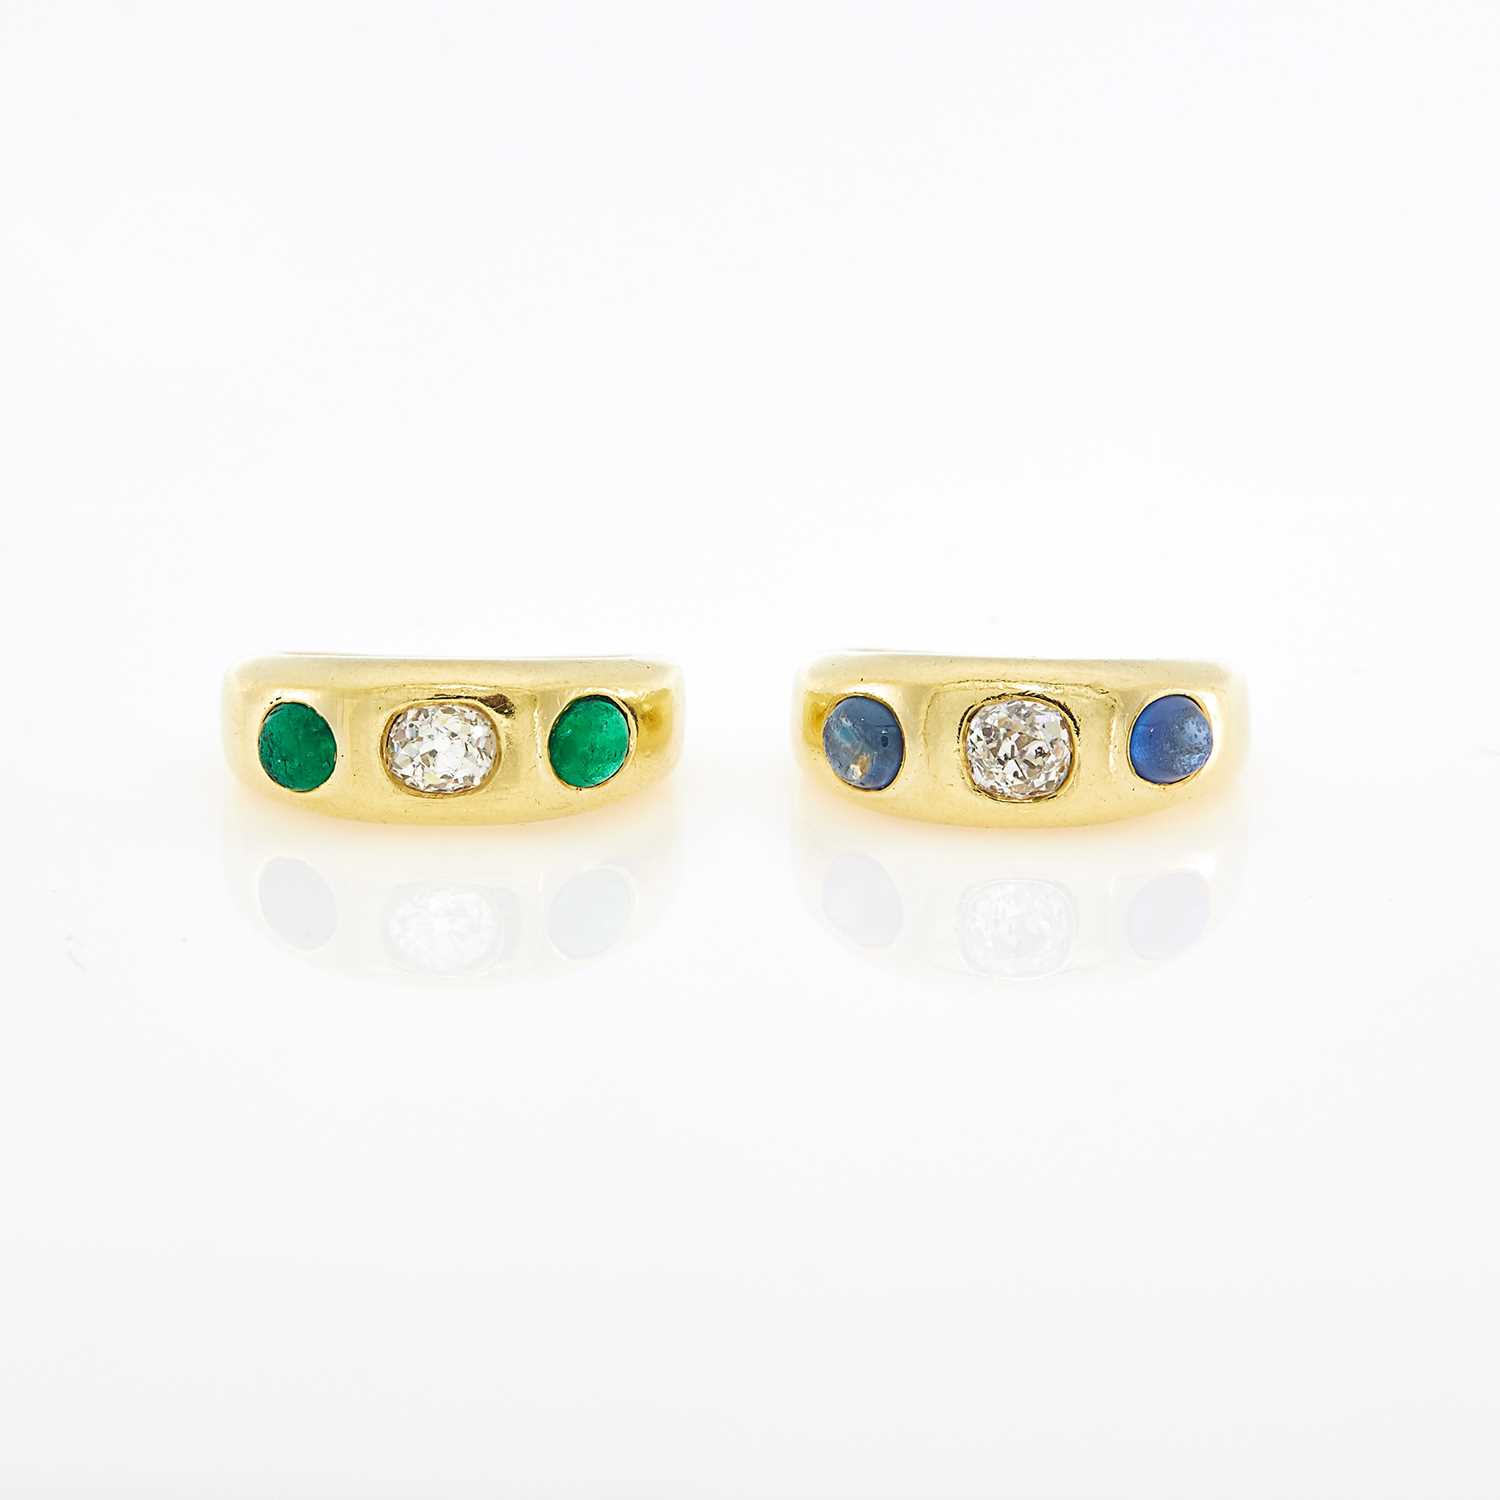 Lot 1015 - Pair of Gold, Diamond and Cabochon Emerald and Sapphire Gypsy Rings